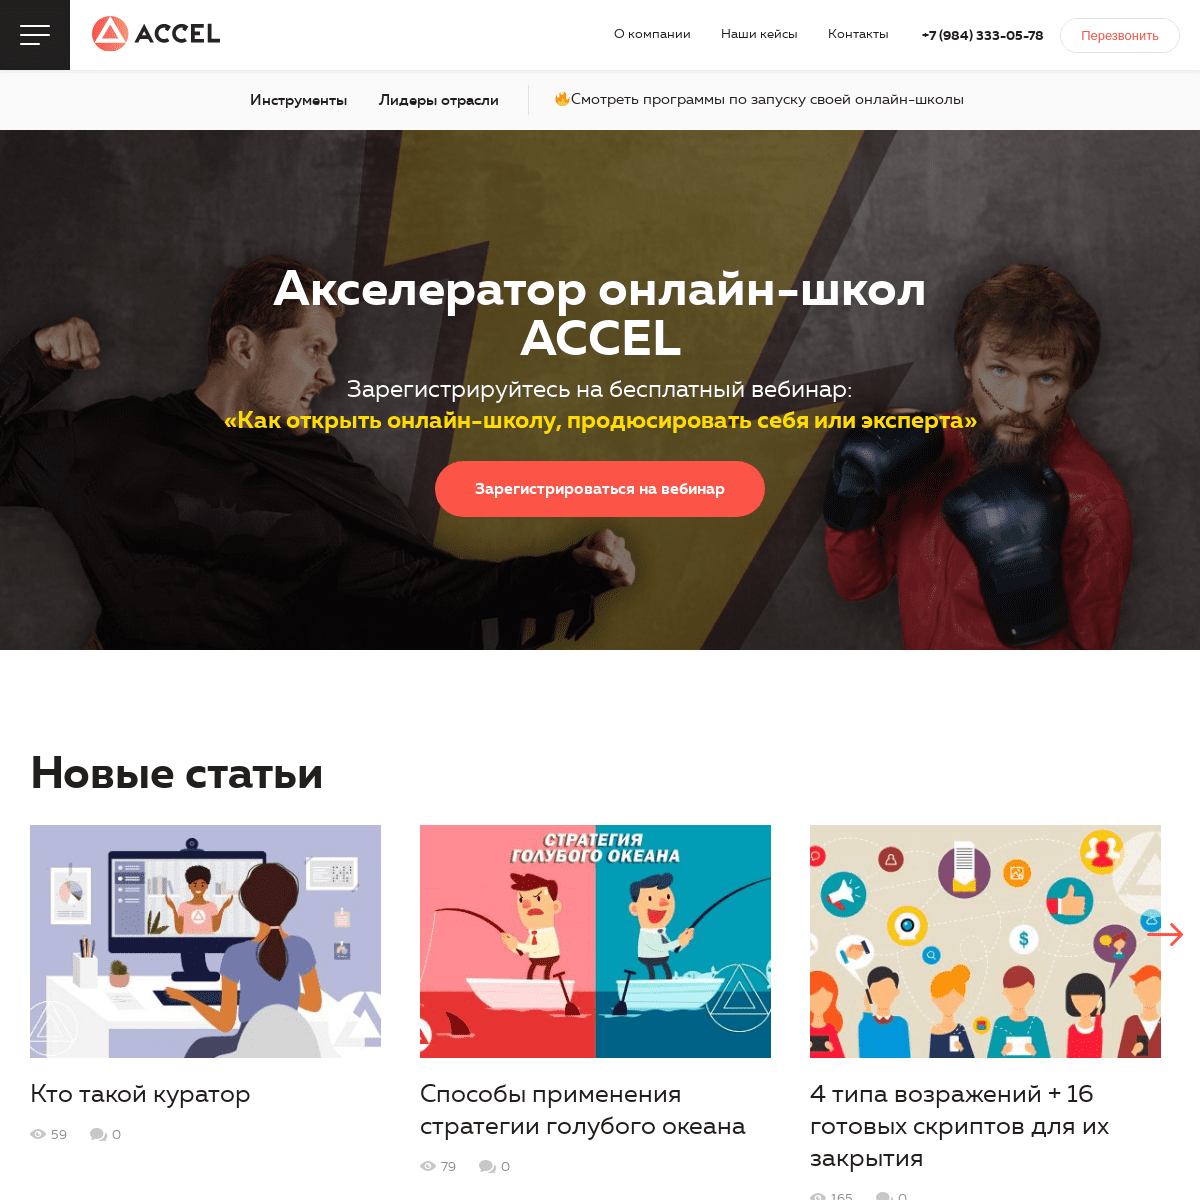 A complete backup of https://the-accel.ru